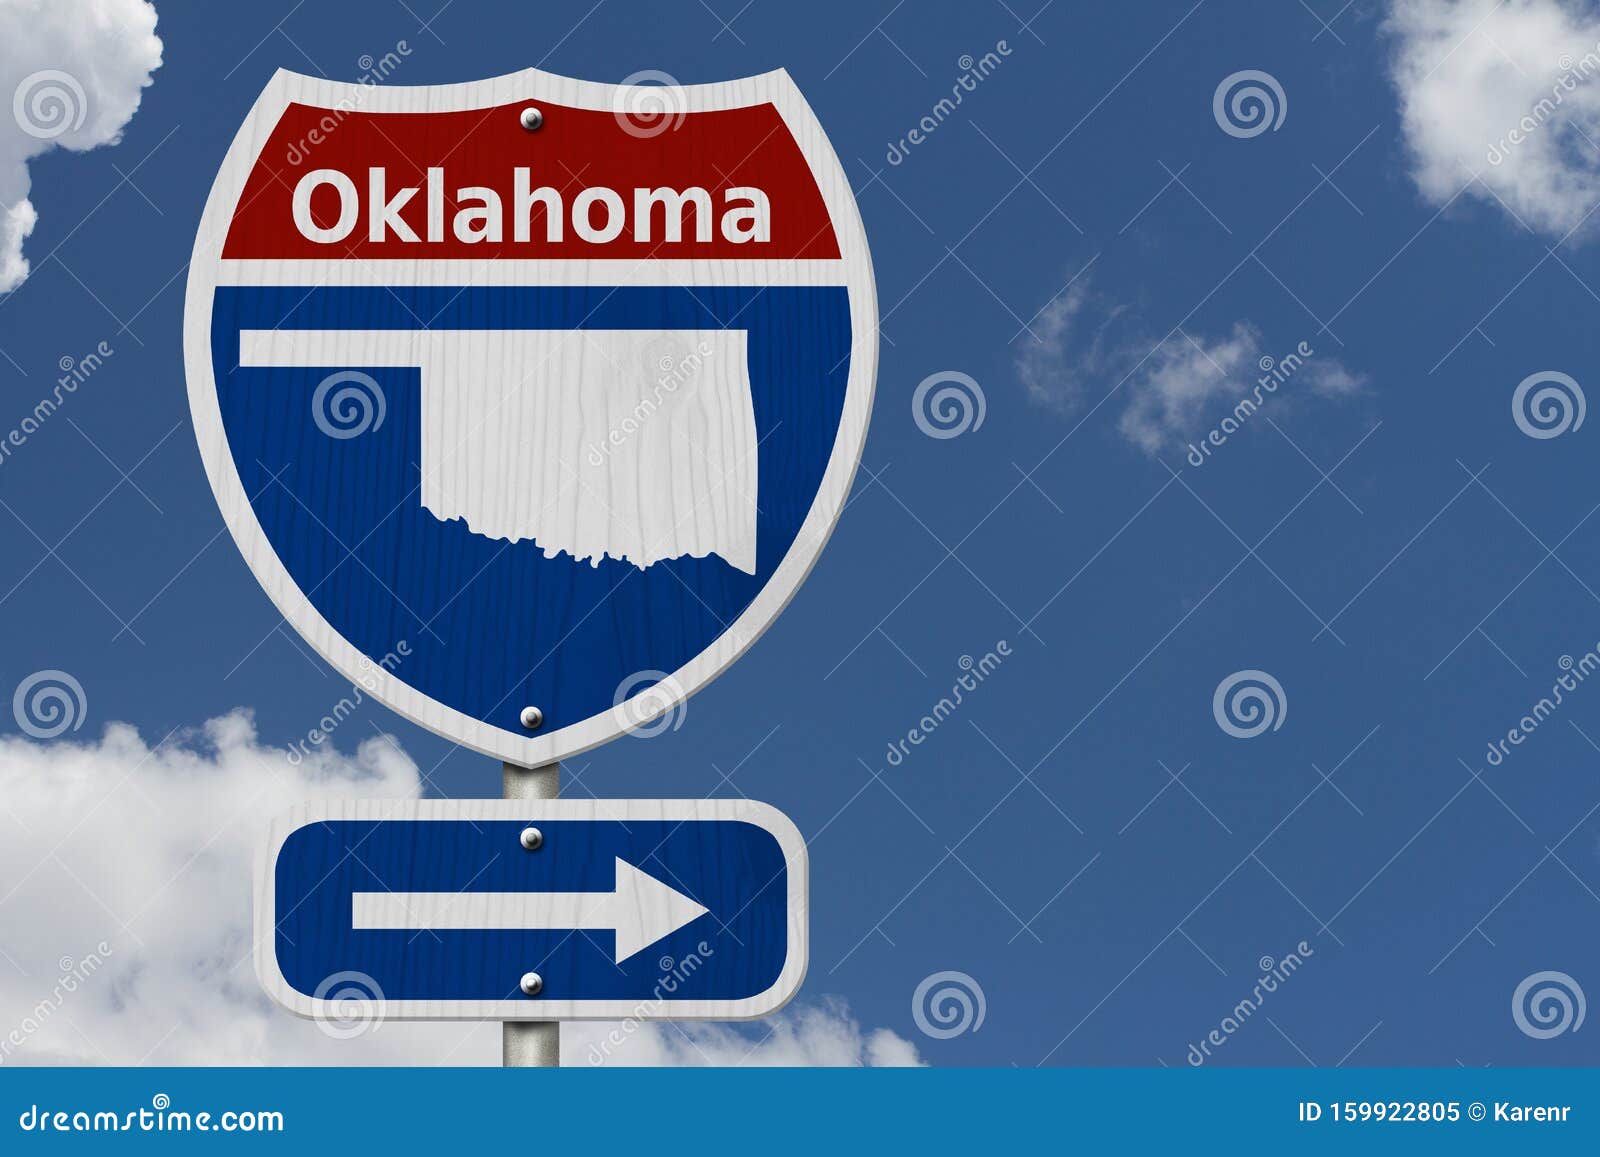 road trip to oklahoma sign